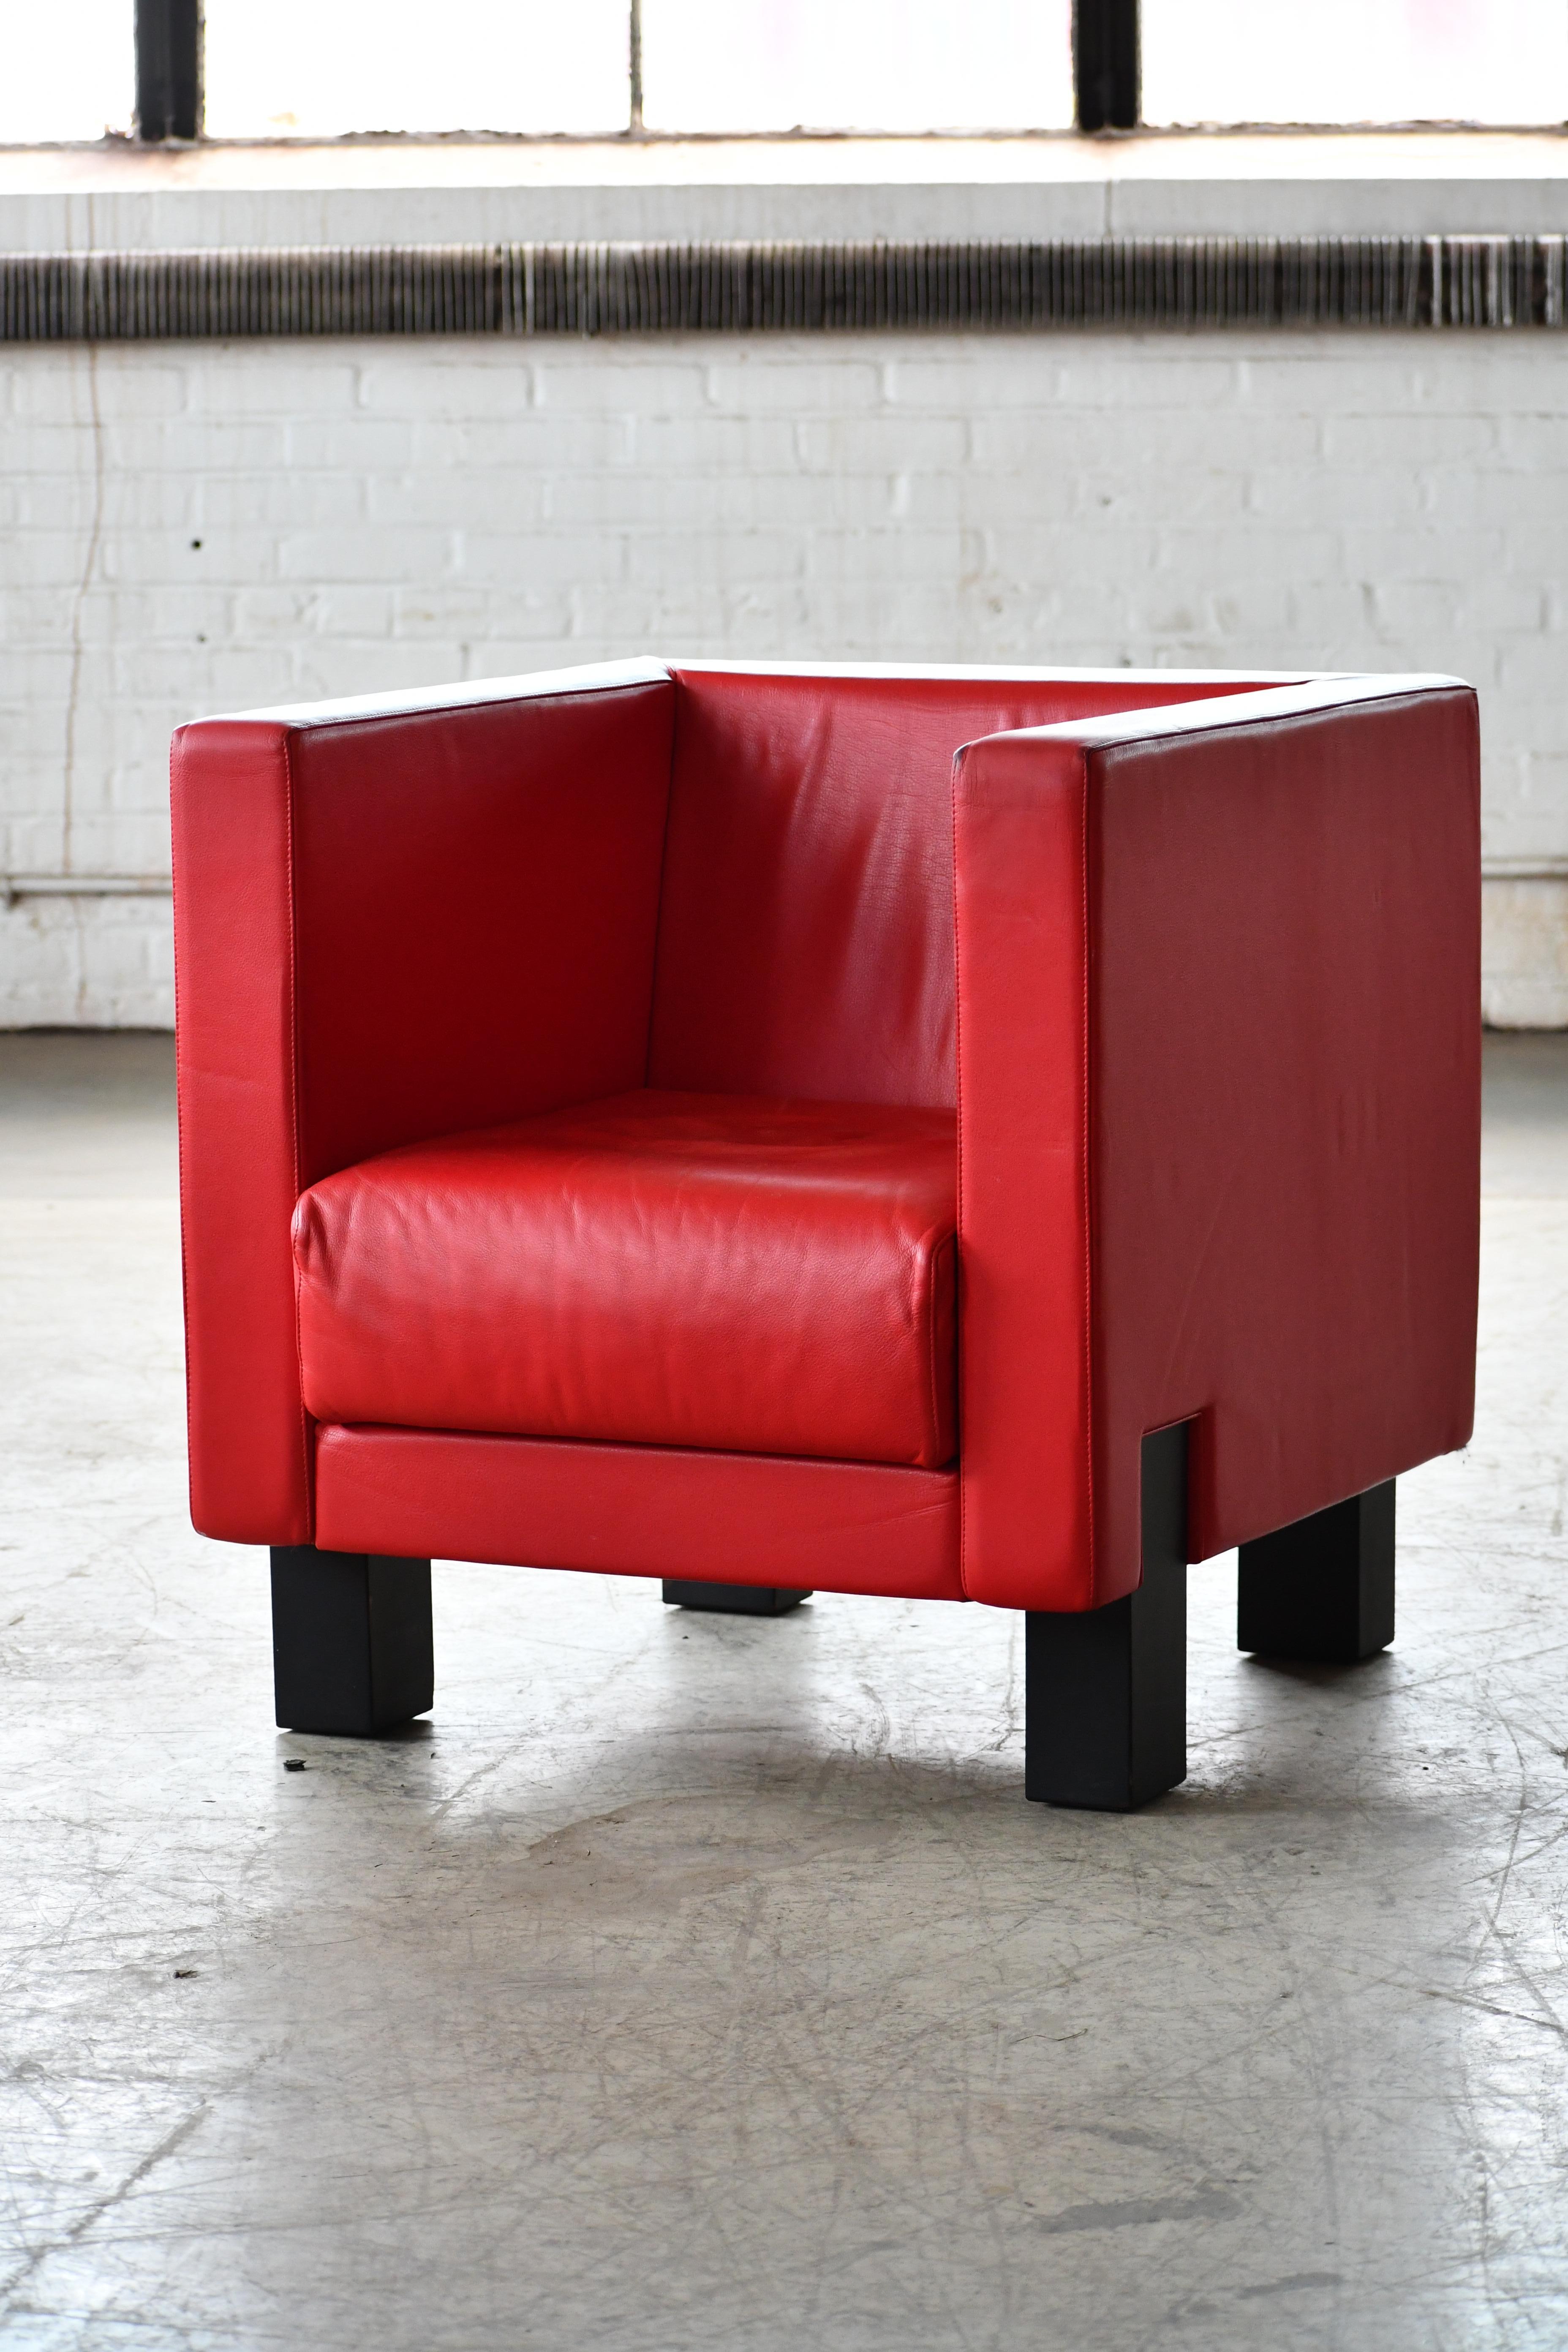 Mid-Century Modern Pair of Italian Vintage Club Chairs in Red Leather ca. 1970's by Poltrona Frau For Sale